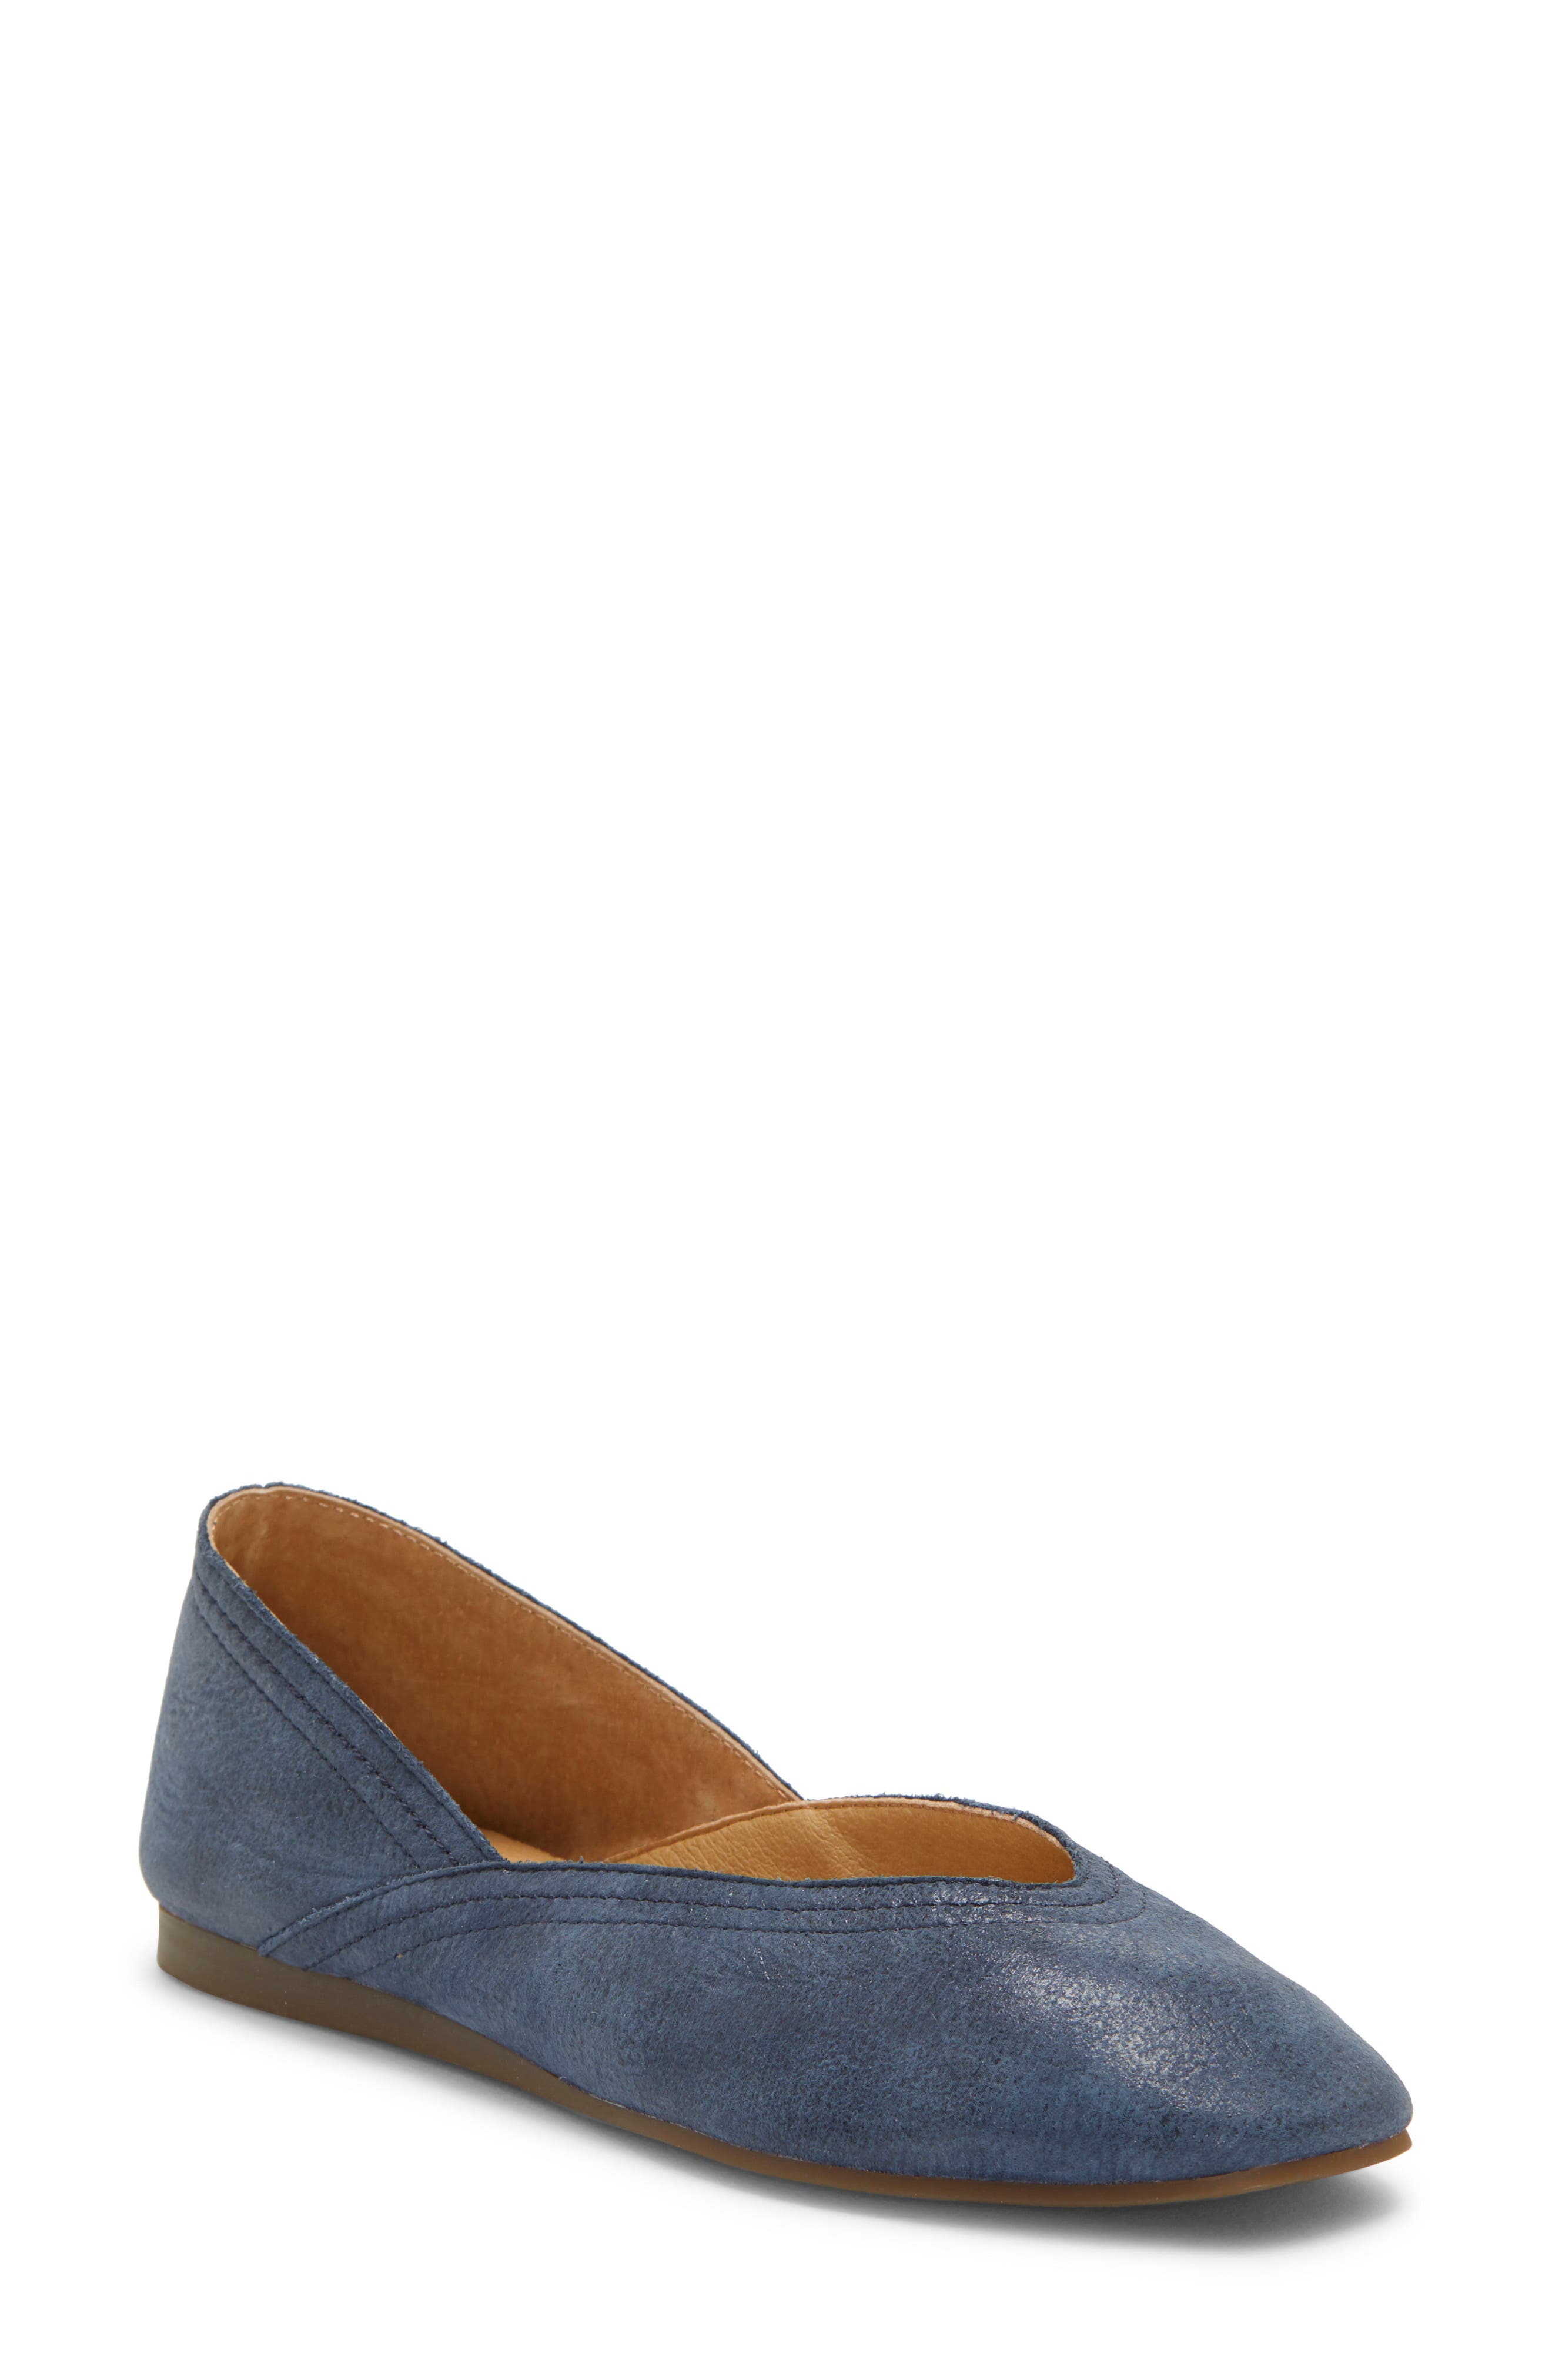 lucky brand flat shoes